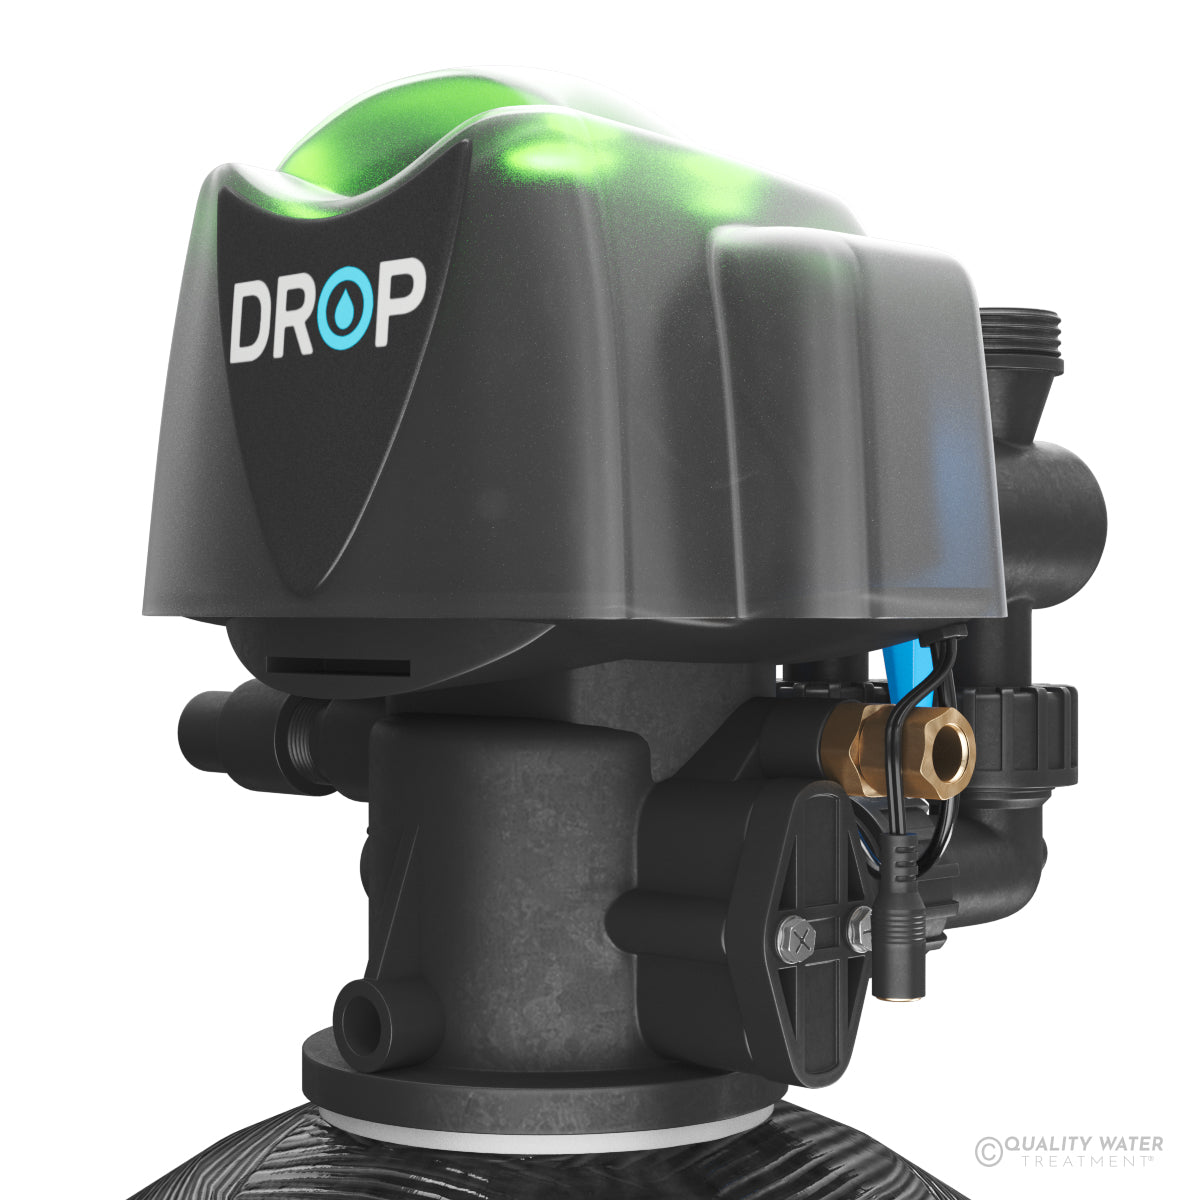 SoftPro Smart Home+ Water Softener with DROP Technology [WELL & CITY WATER]